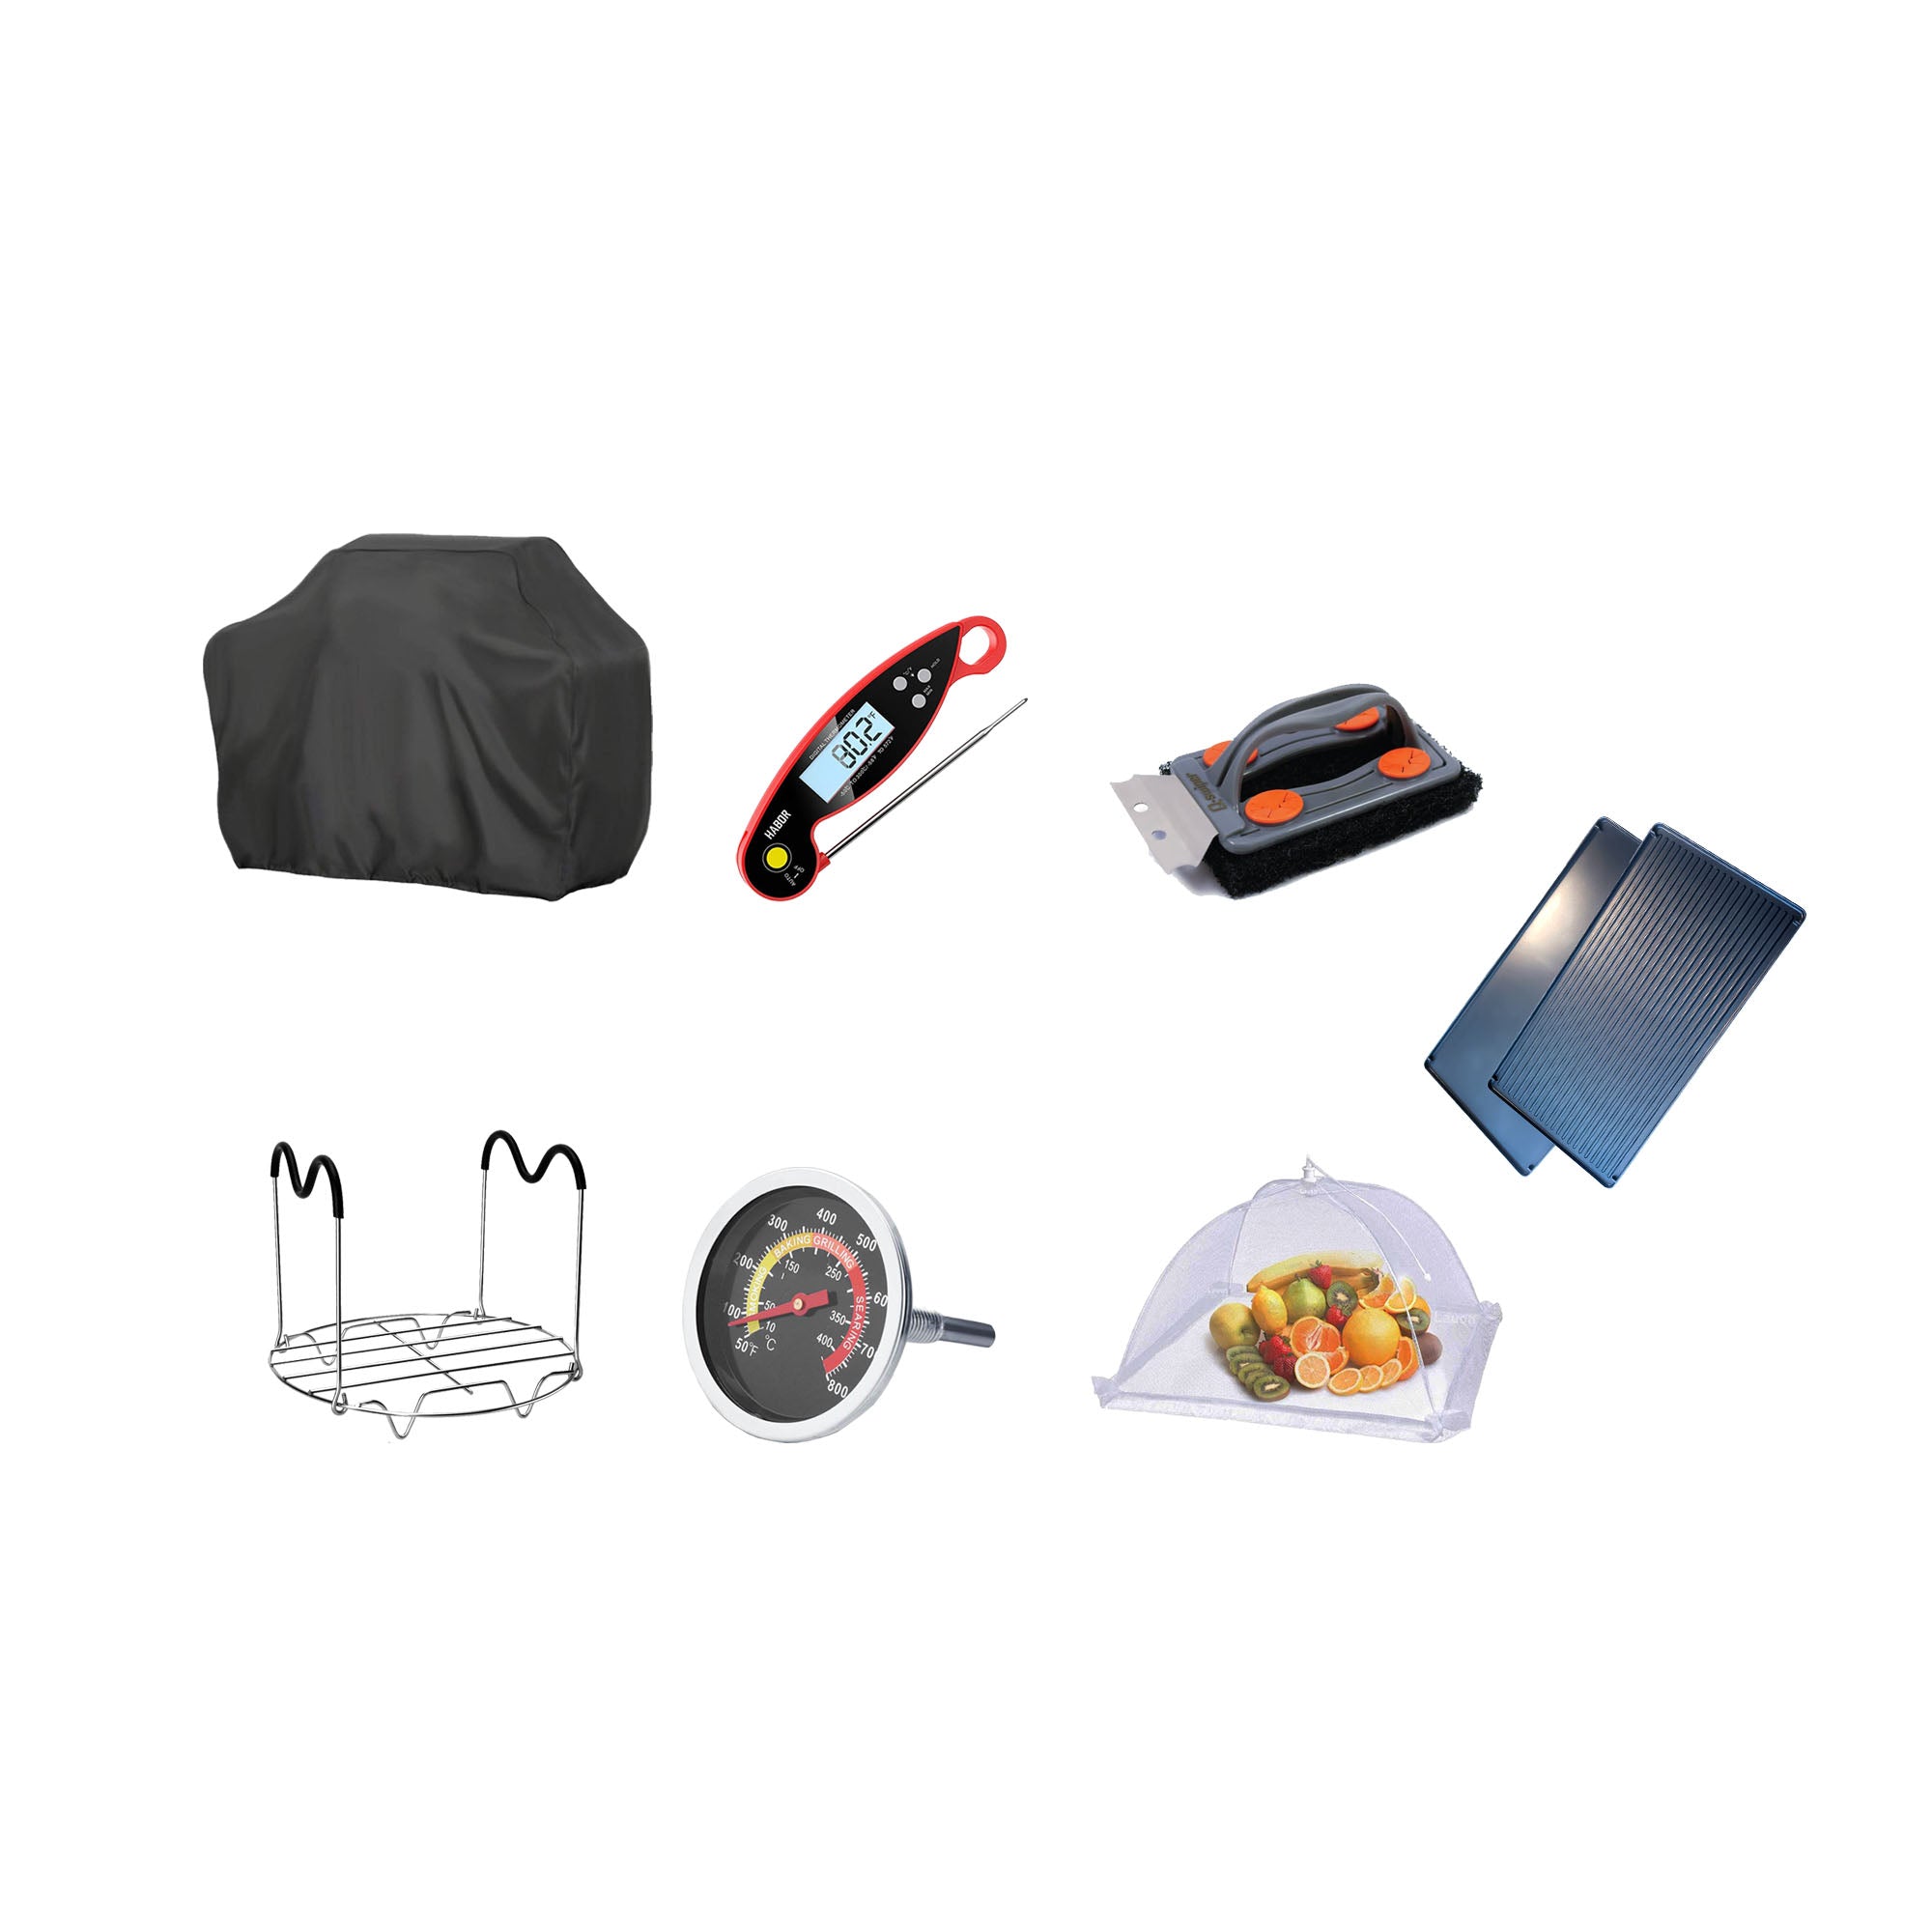 Premium BBQ Bundle for Smooth Grills - 7-in-1 Barbecue Cooking Kit smart pack - e4cents